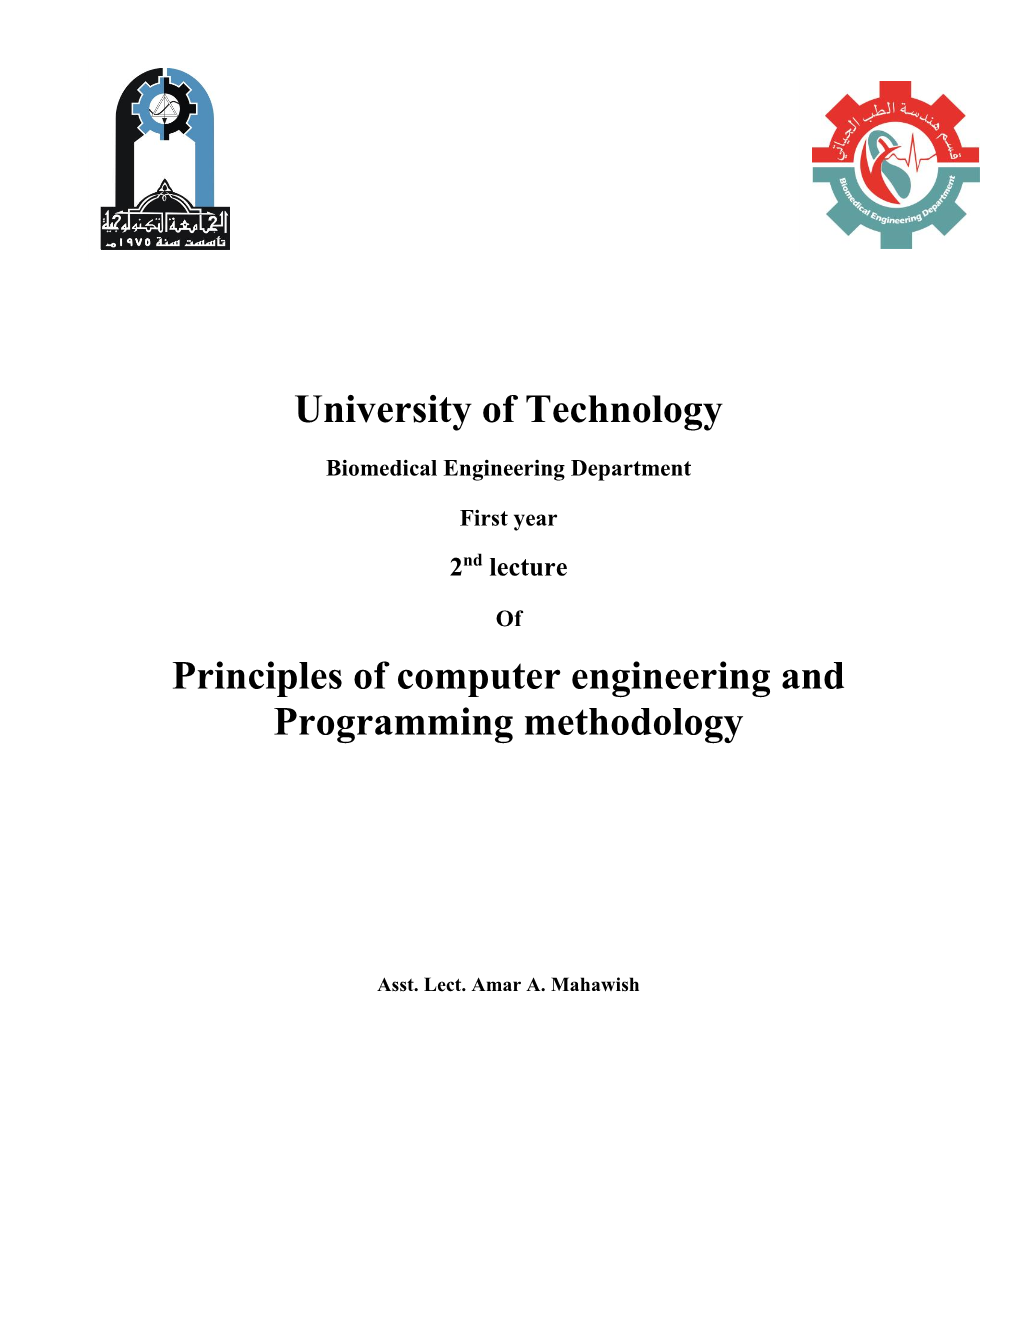 University of Technology Principles of Computer Engineering And